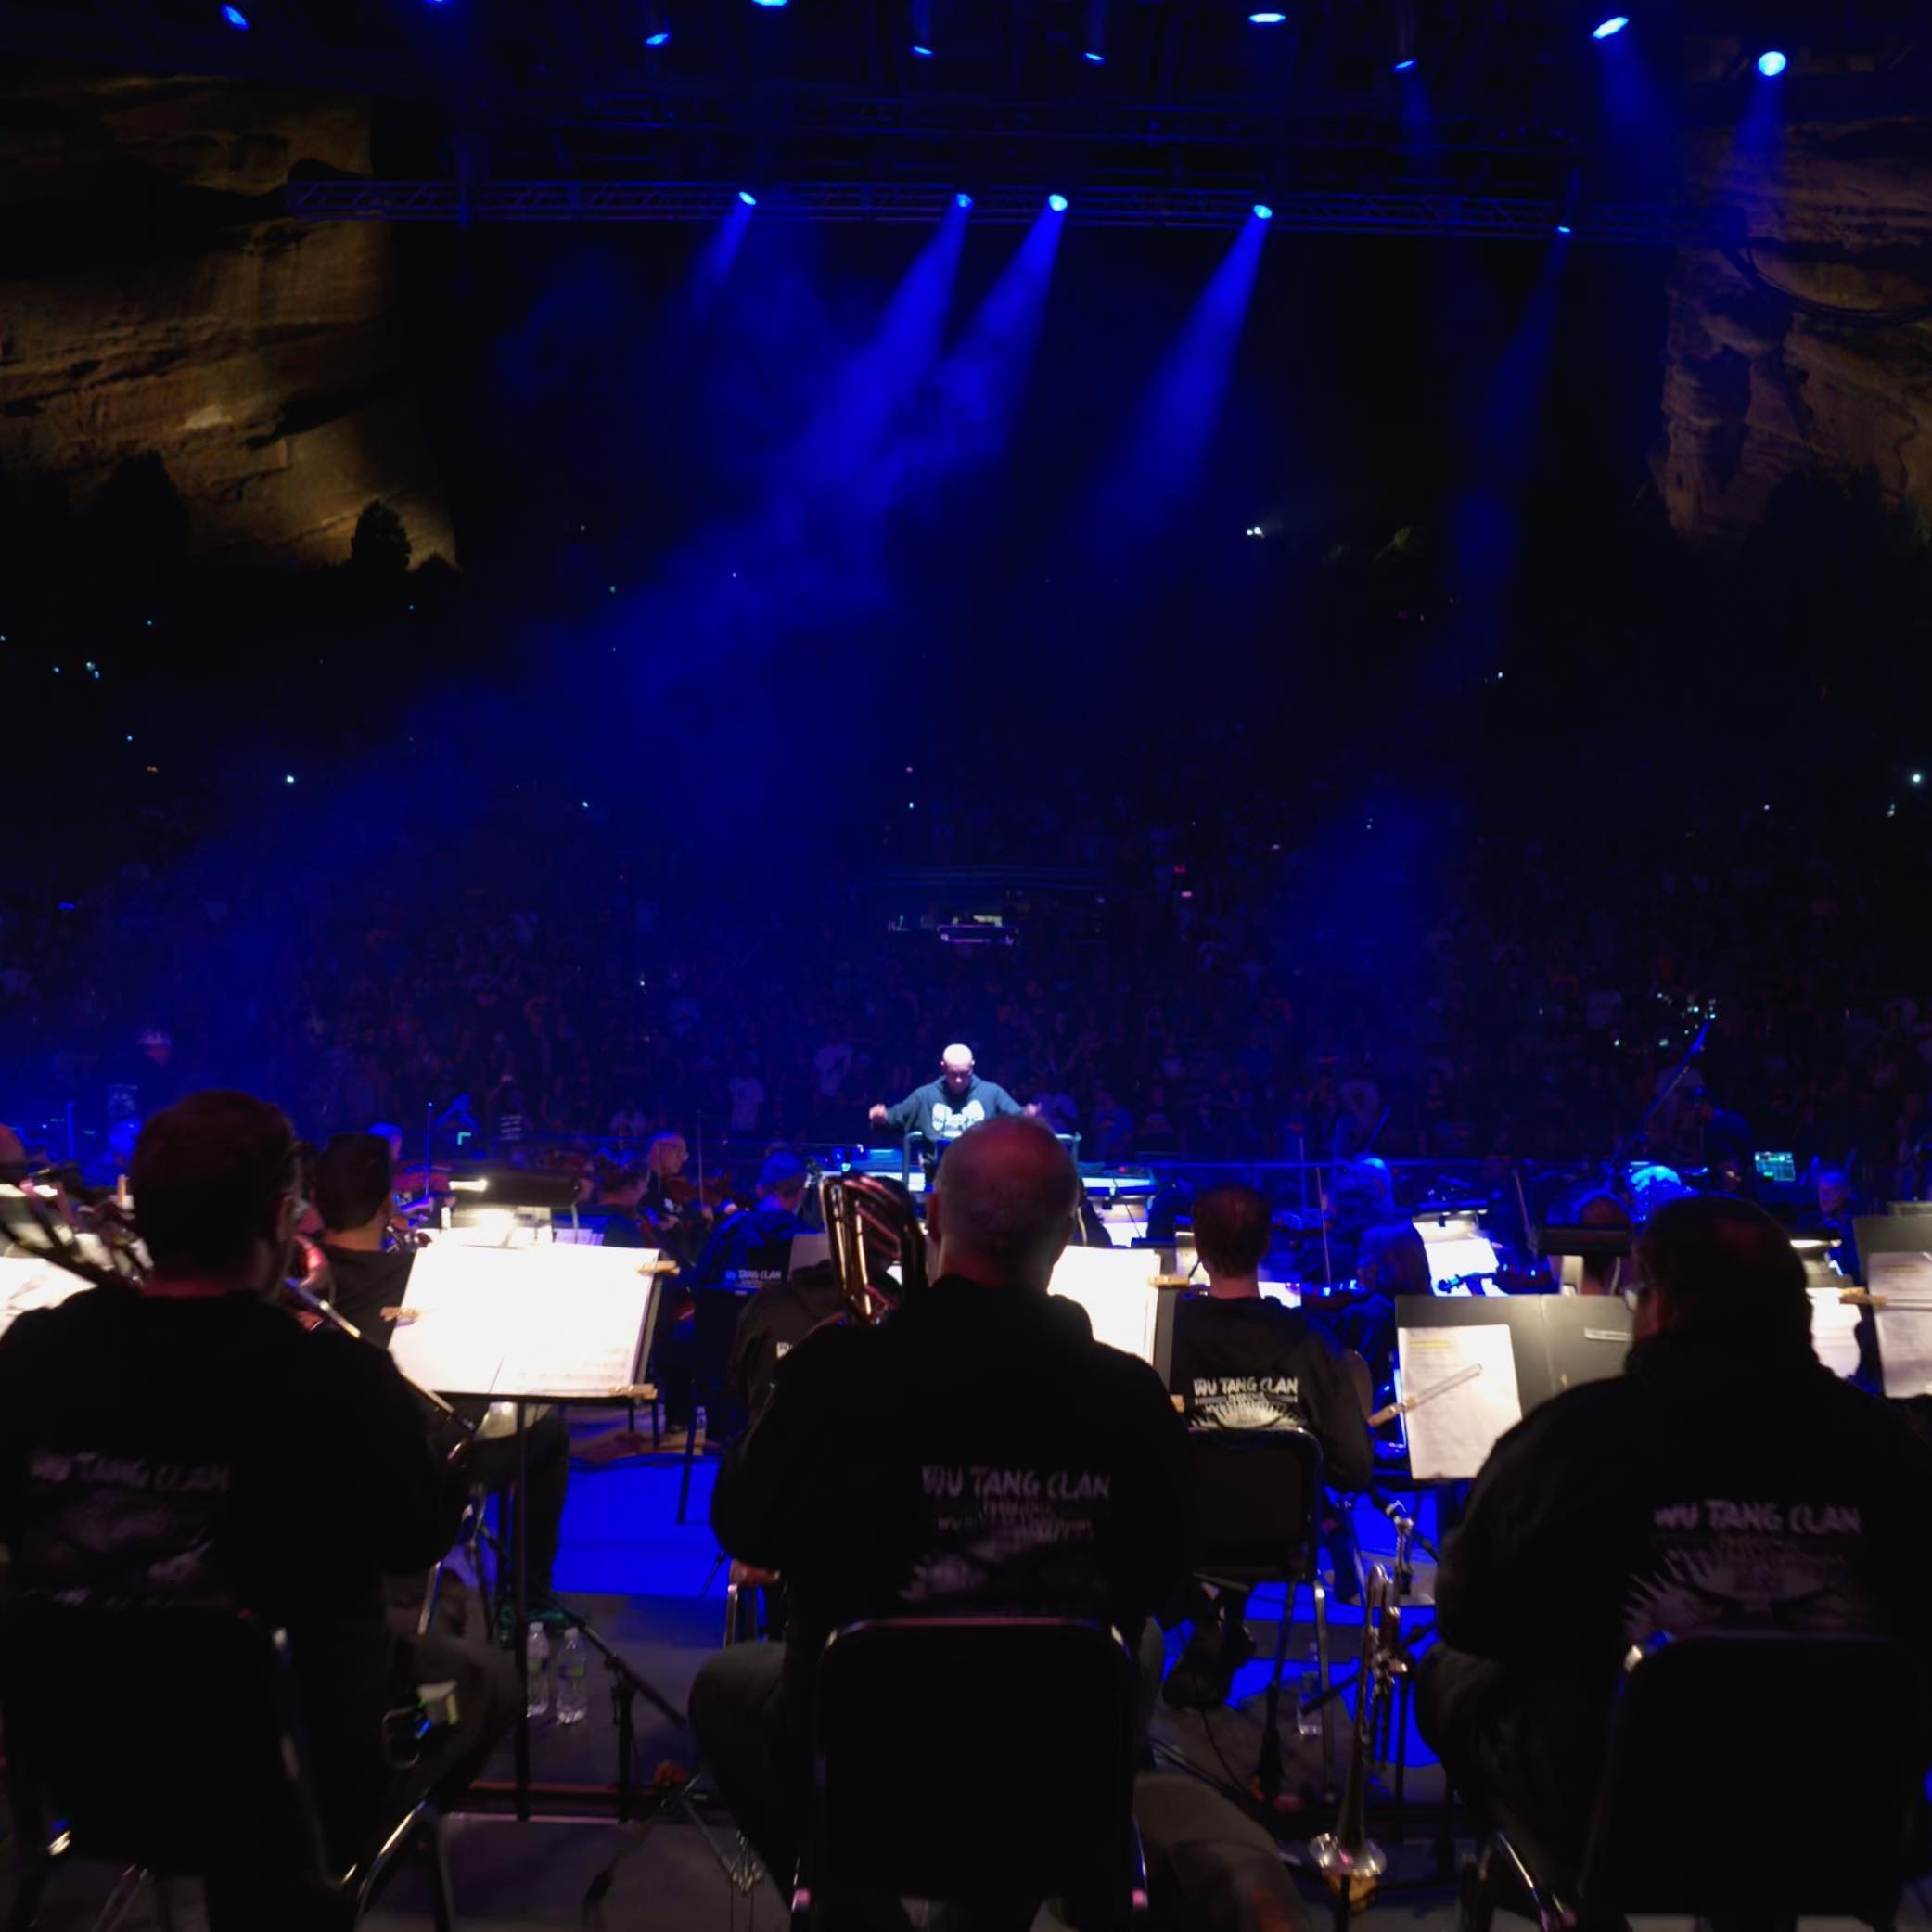 On August 13, 2021, The Wu-Tang Clan, backed by the 60-piece Colorado Symphony Orchestra, performed at the famed Red Rocks Amphitheatre. Roughly 10,000 fans witnessed one of the most extraordinary concerts in hip-hop music history. Welcome to A WU-TA